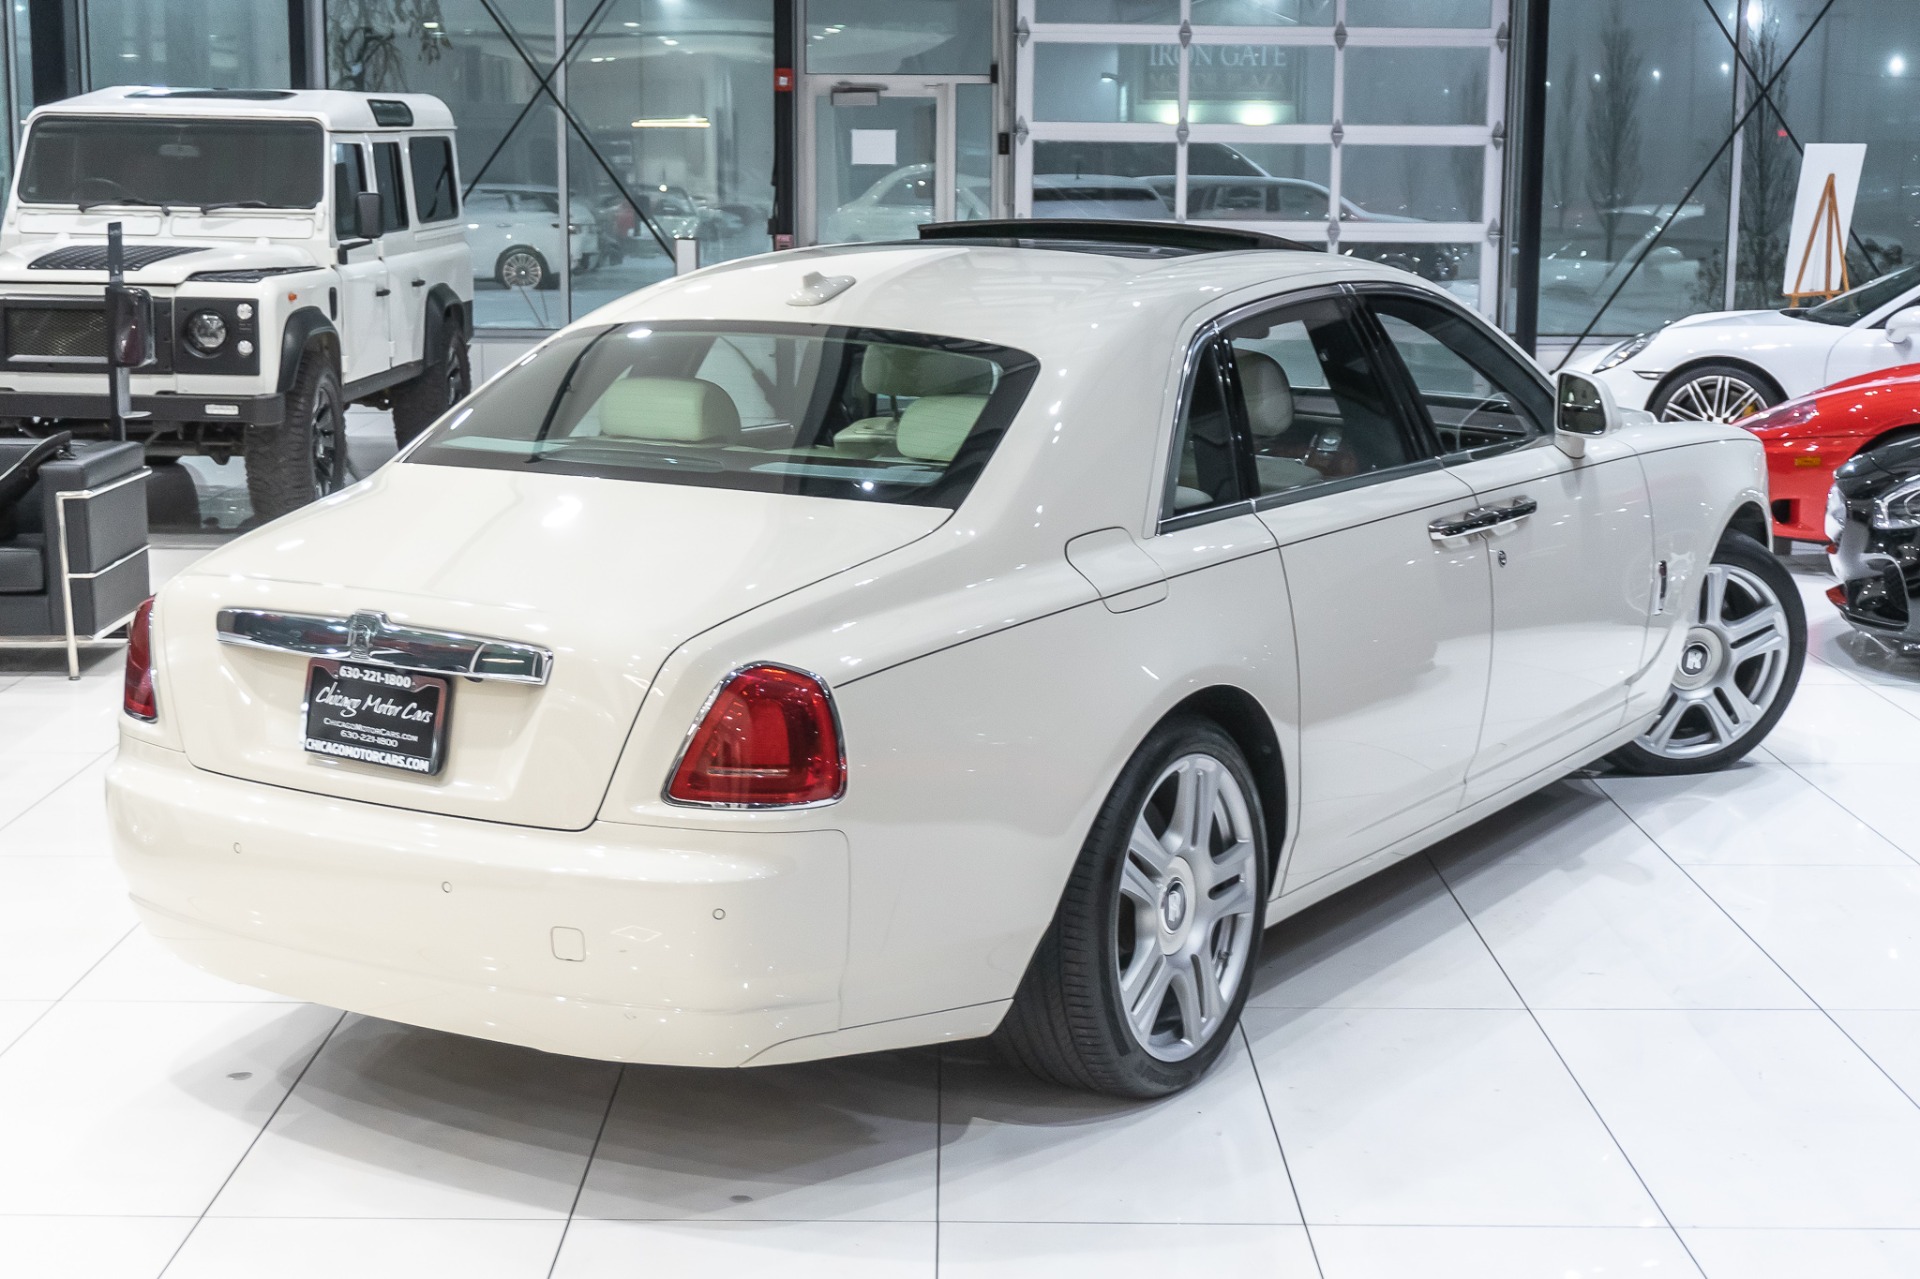 Used-2015-Rolls-Royce-Ghost-DRIVERS-ASST-PKG-PICNIC-TABLES-FULL-PAINT-PROTECTION-FILM-344k-MSRP